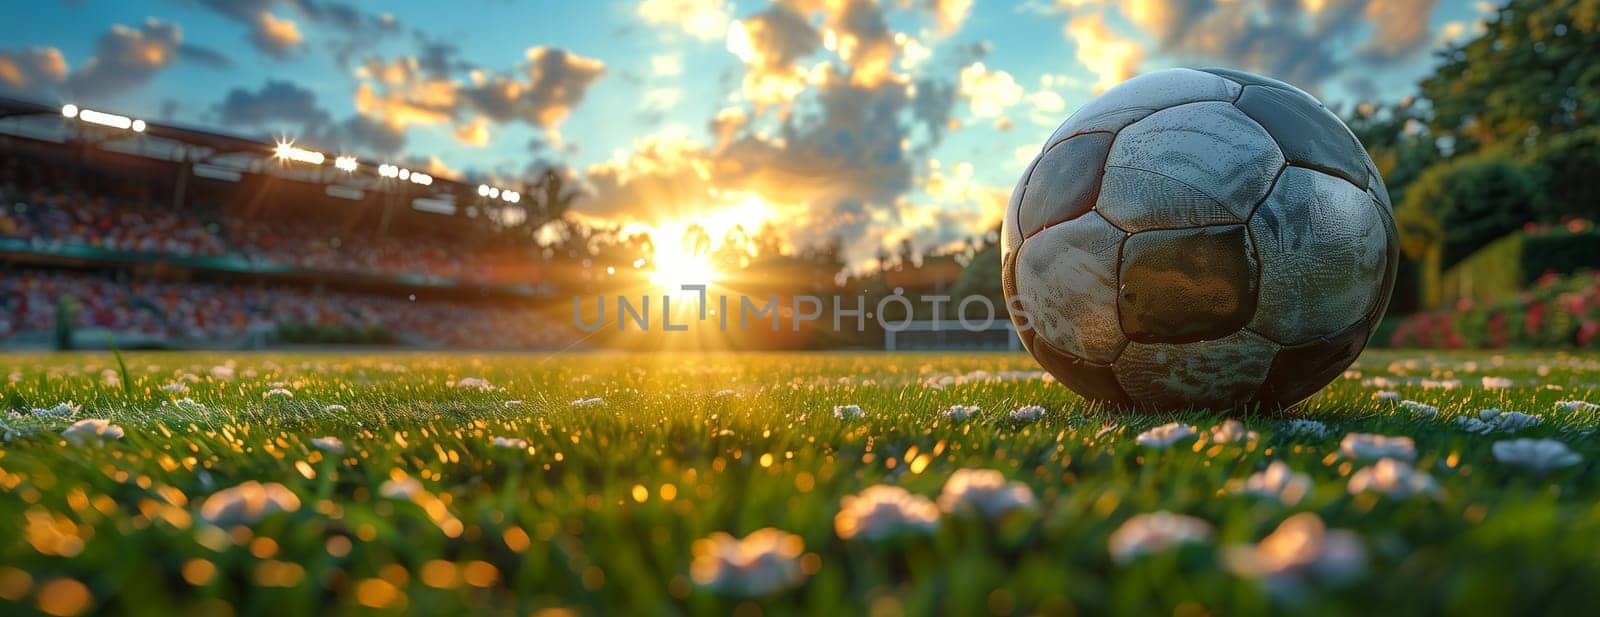 A soccer ball rests peacefully in the grass of a sunny meadow, under a clear sky with fluffy clouds, creating a beautiful natural landscape